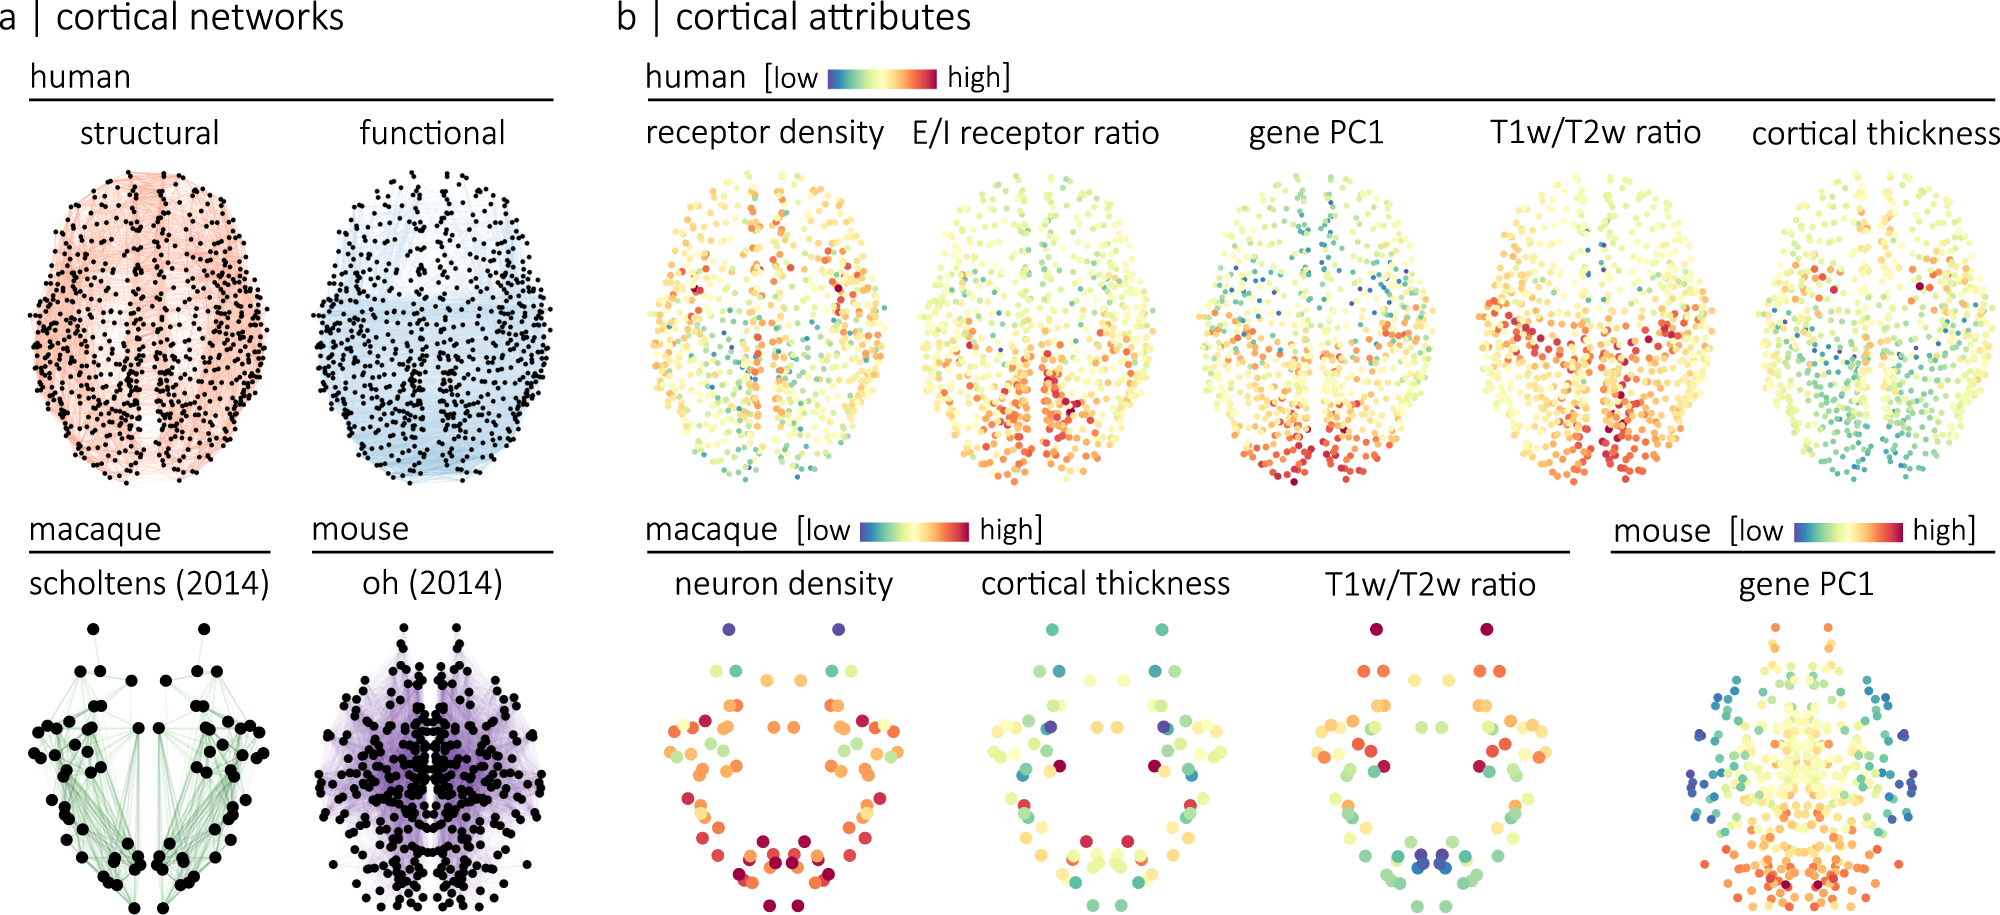 Assortative mixing in micro-architecturally annotated brain connectomes |  Nature Communications